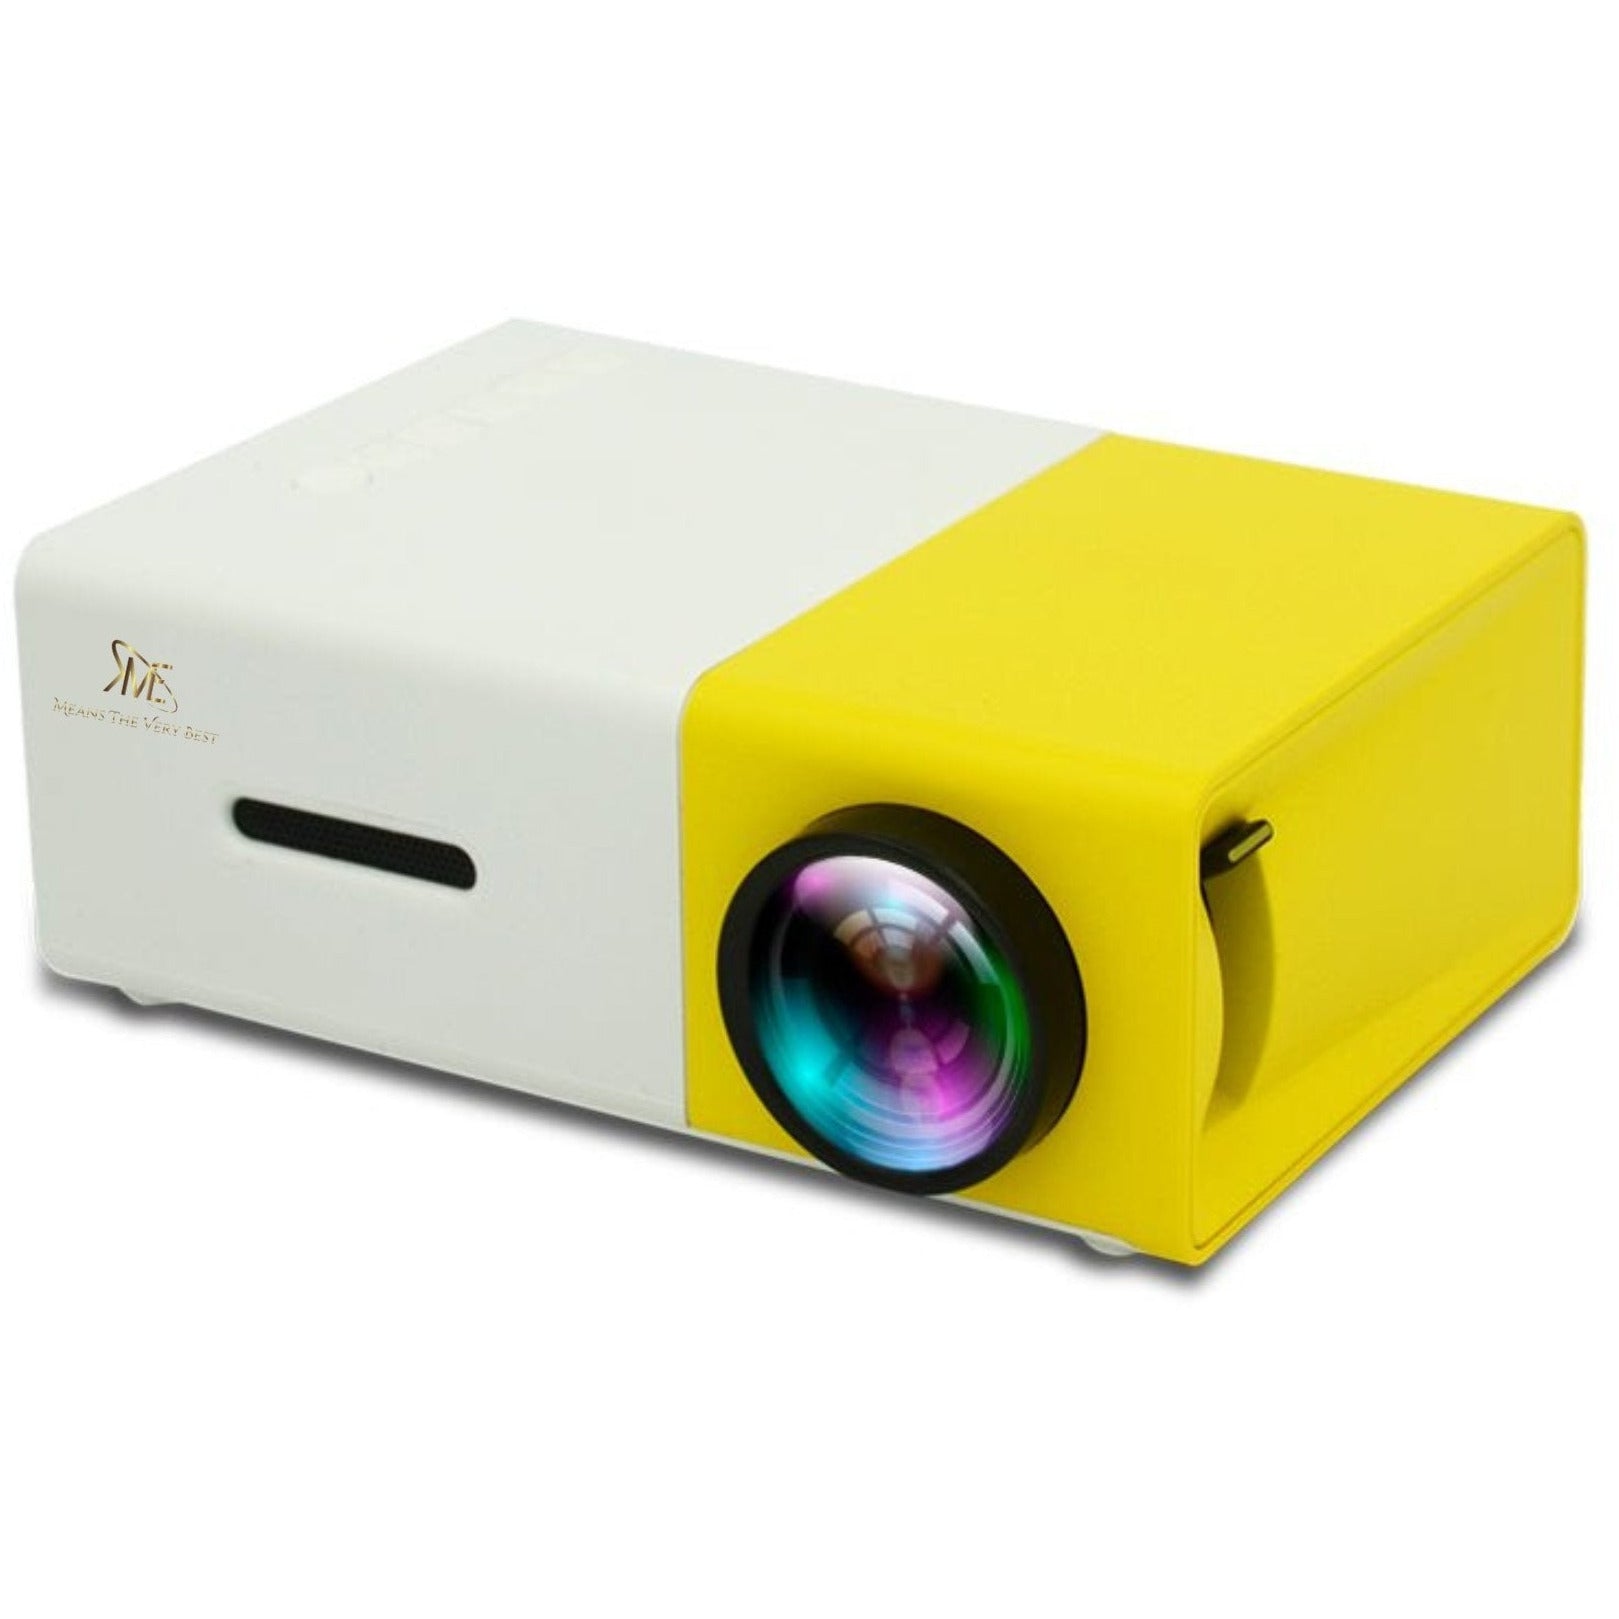 KME means the very best - Smart Projector Videos Movies Multimedia LED Portable Mini Travel Projector - KME means the very best